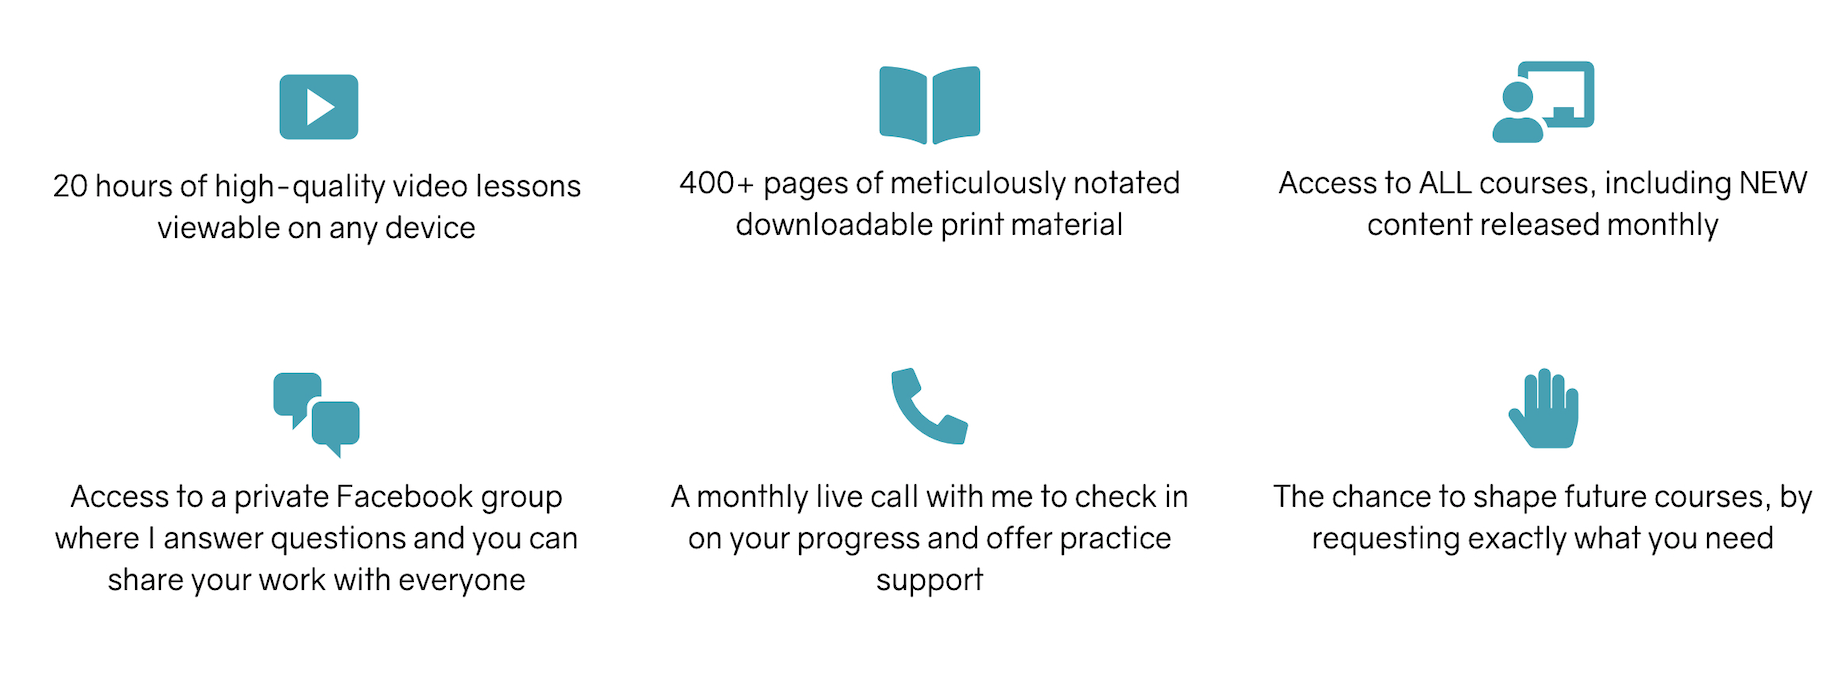 20 hours of video lessons, 400+ pages of print material, access to all courses, access to a private forum, a monthly live call with me to check in on your progress, the chance to shape future courses.